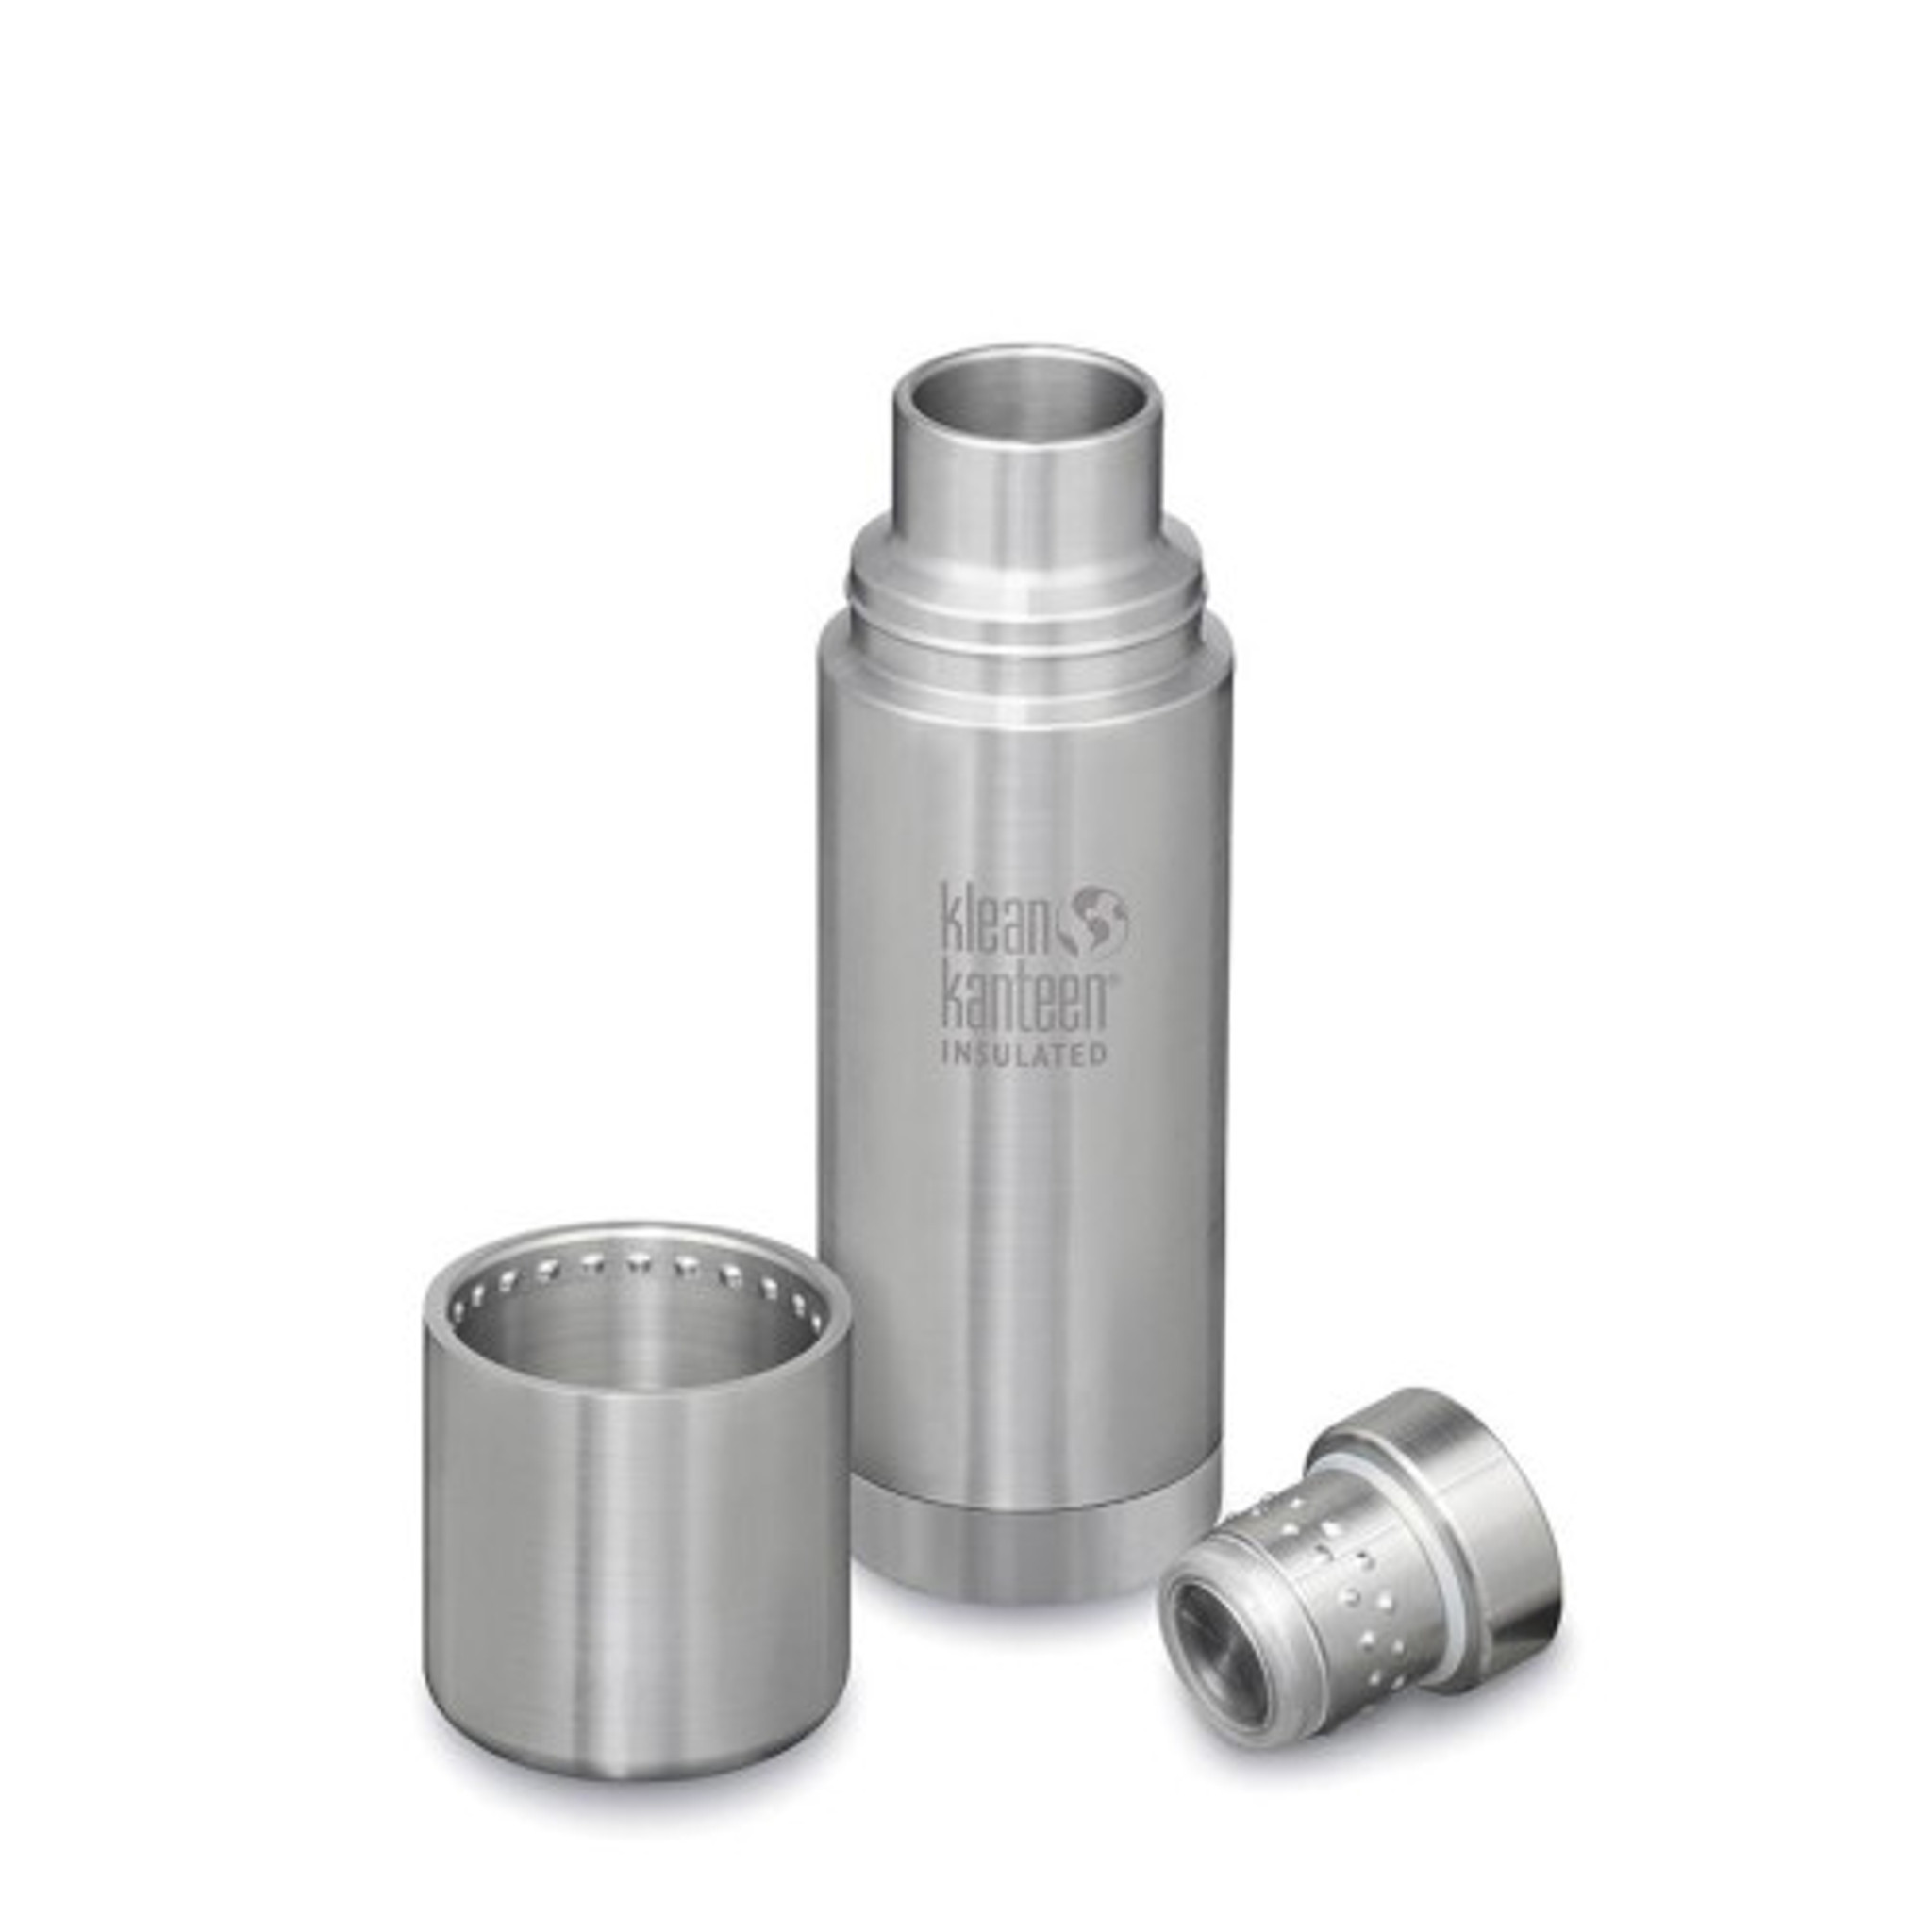 thermos steel bottle